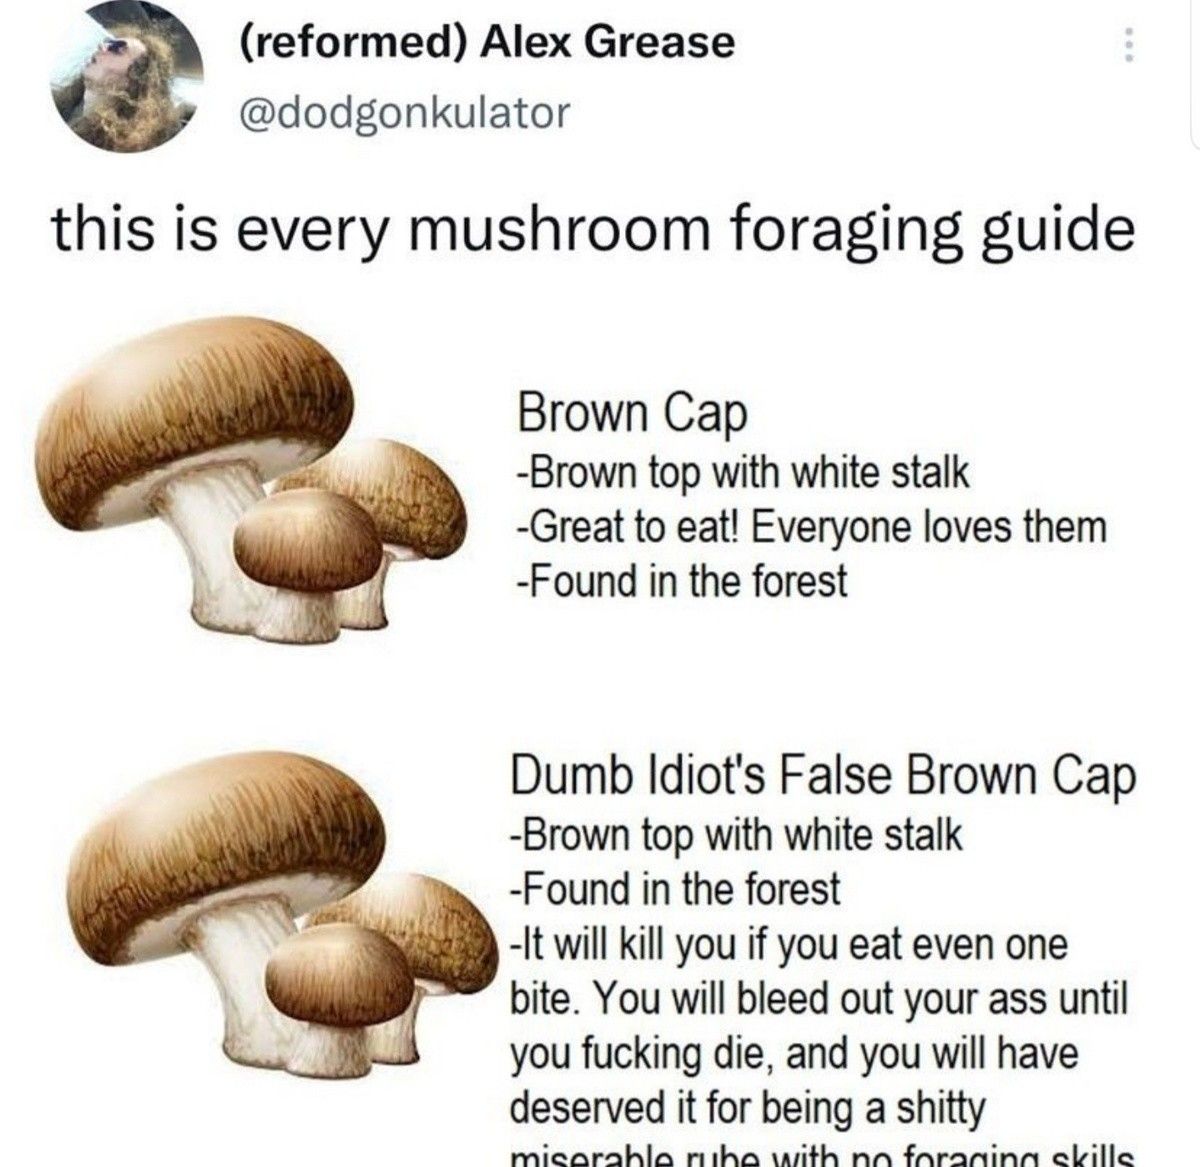 Mushrooms aren't even any good